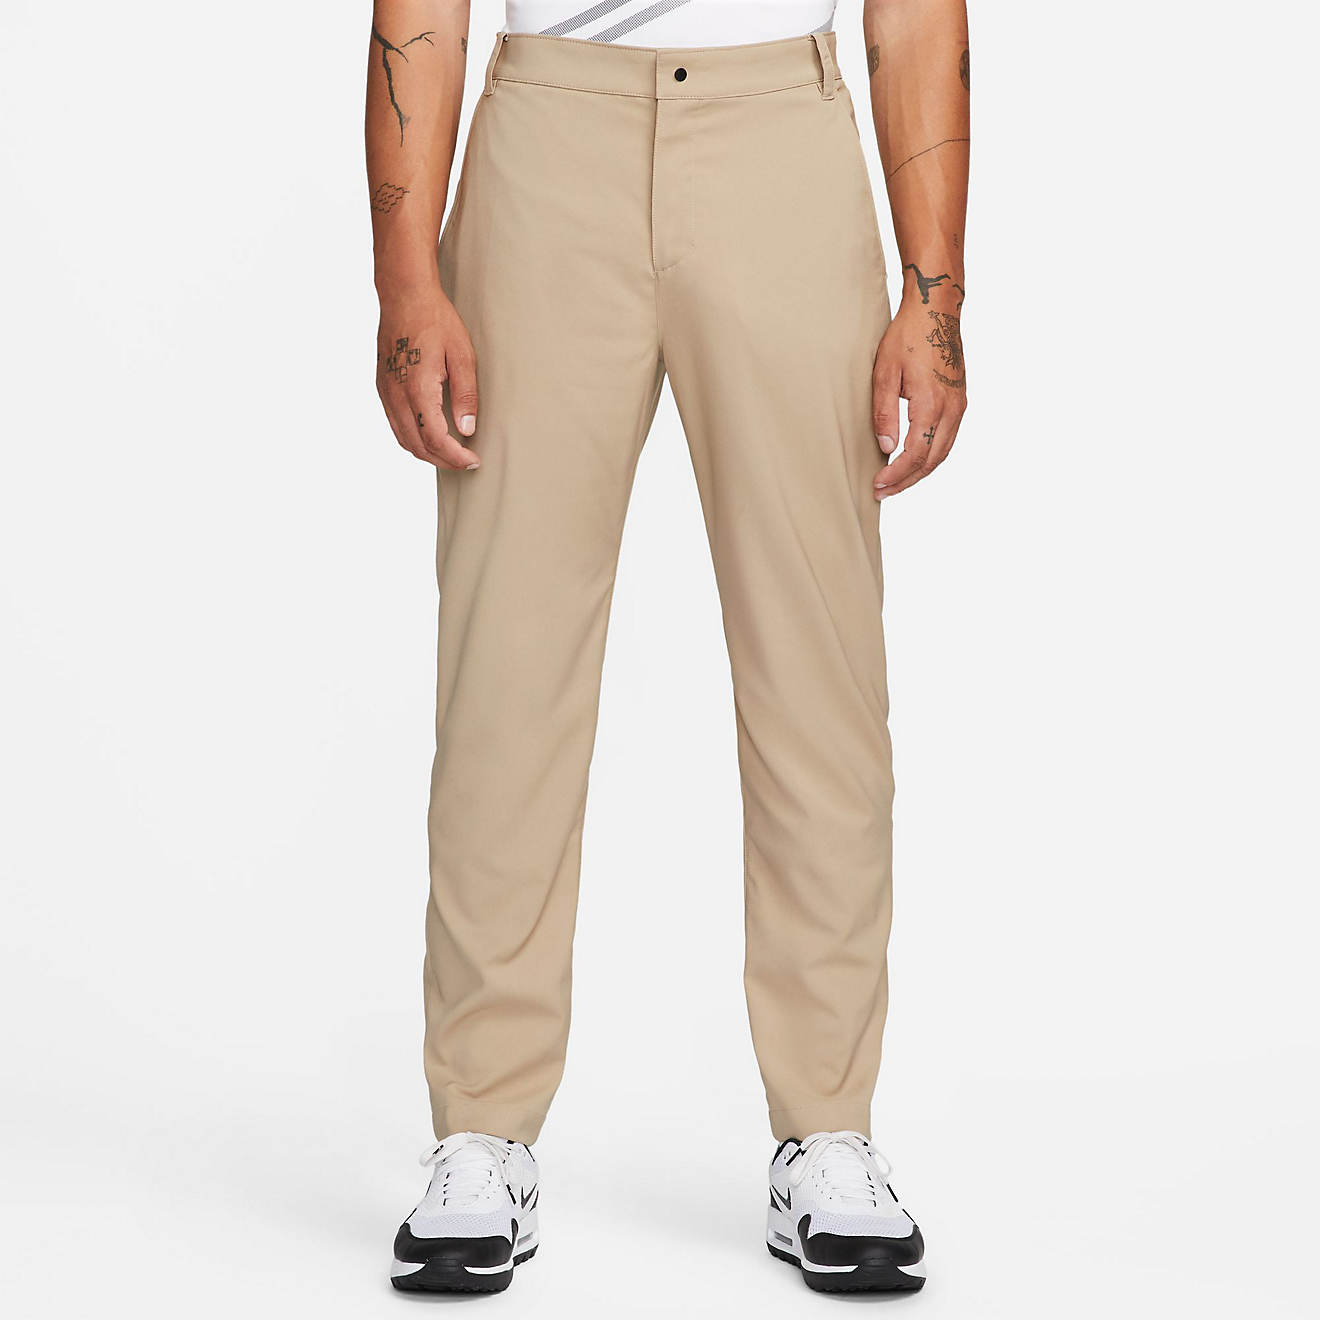 Nike Men's Dri-FIT Victory Pants | Free Shipping at Academy